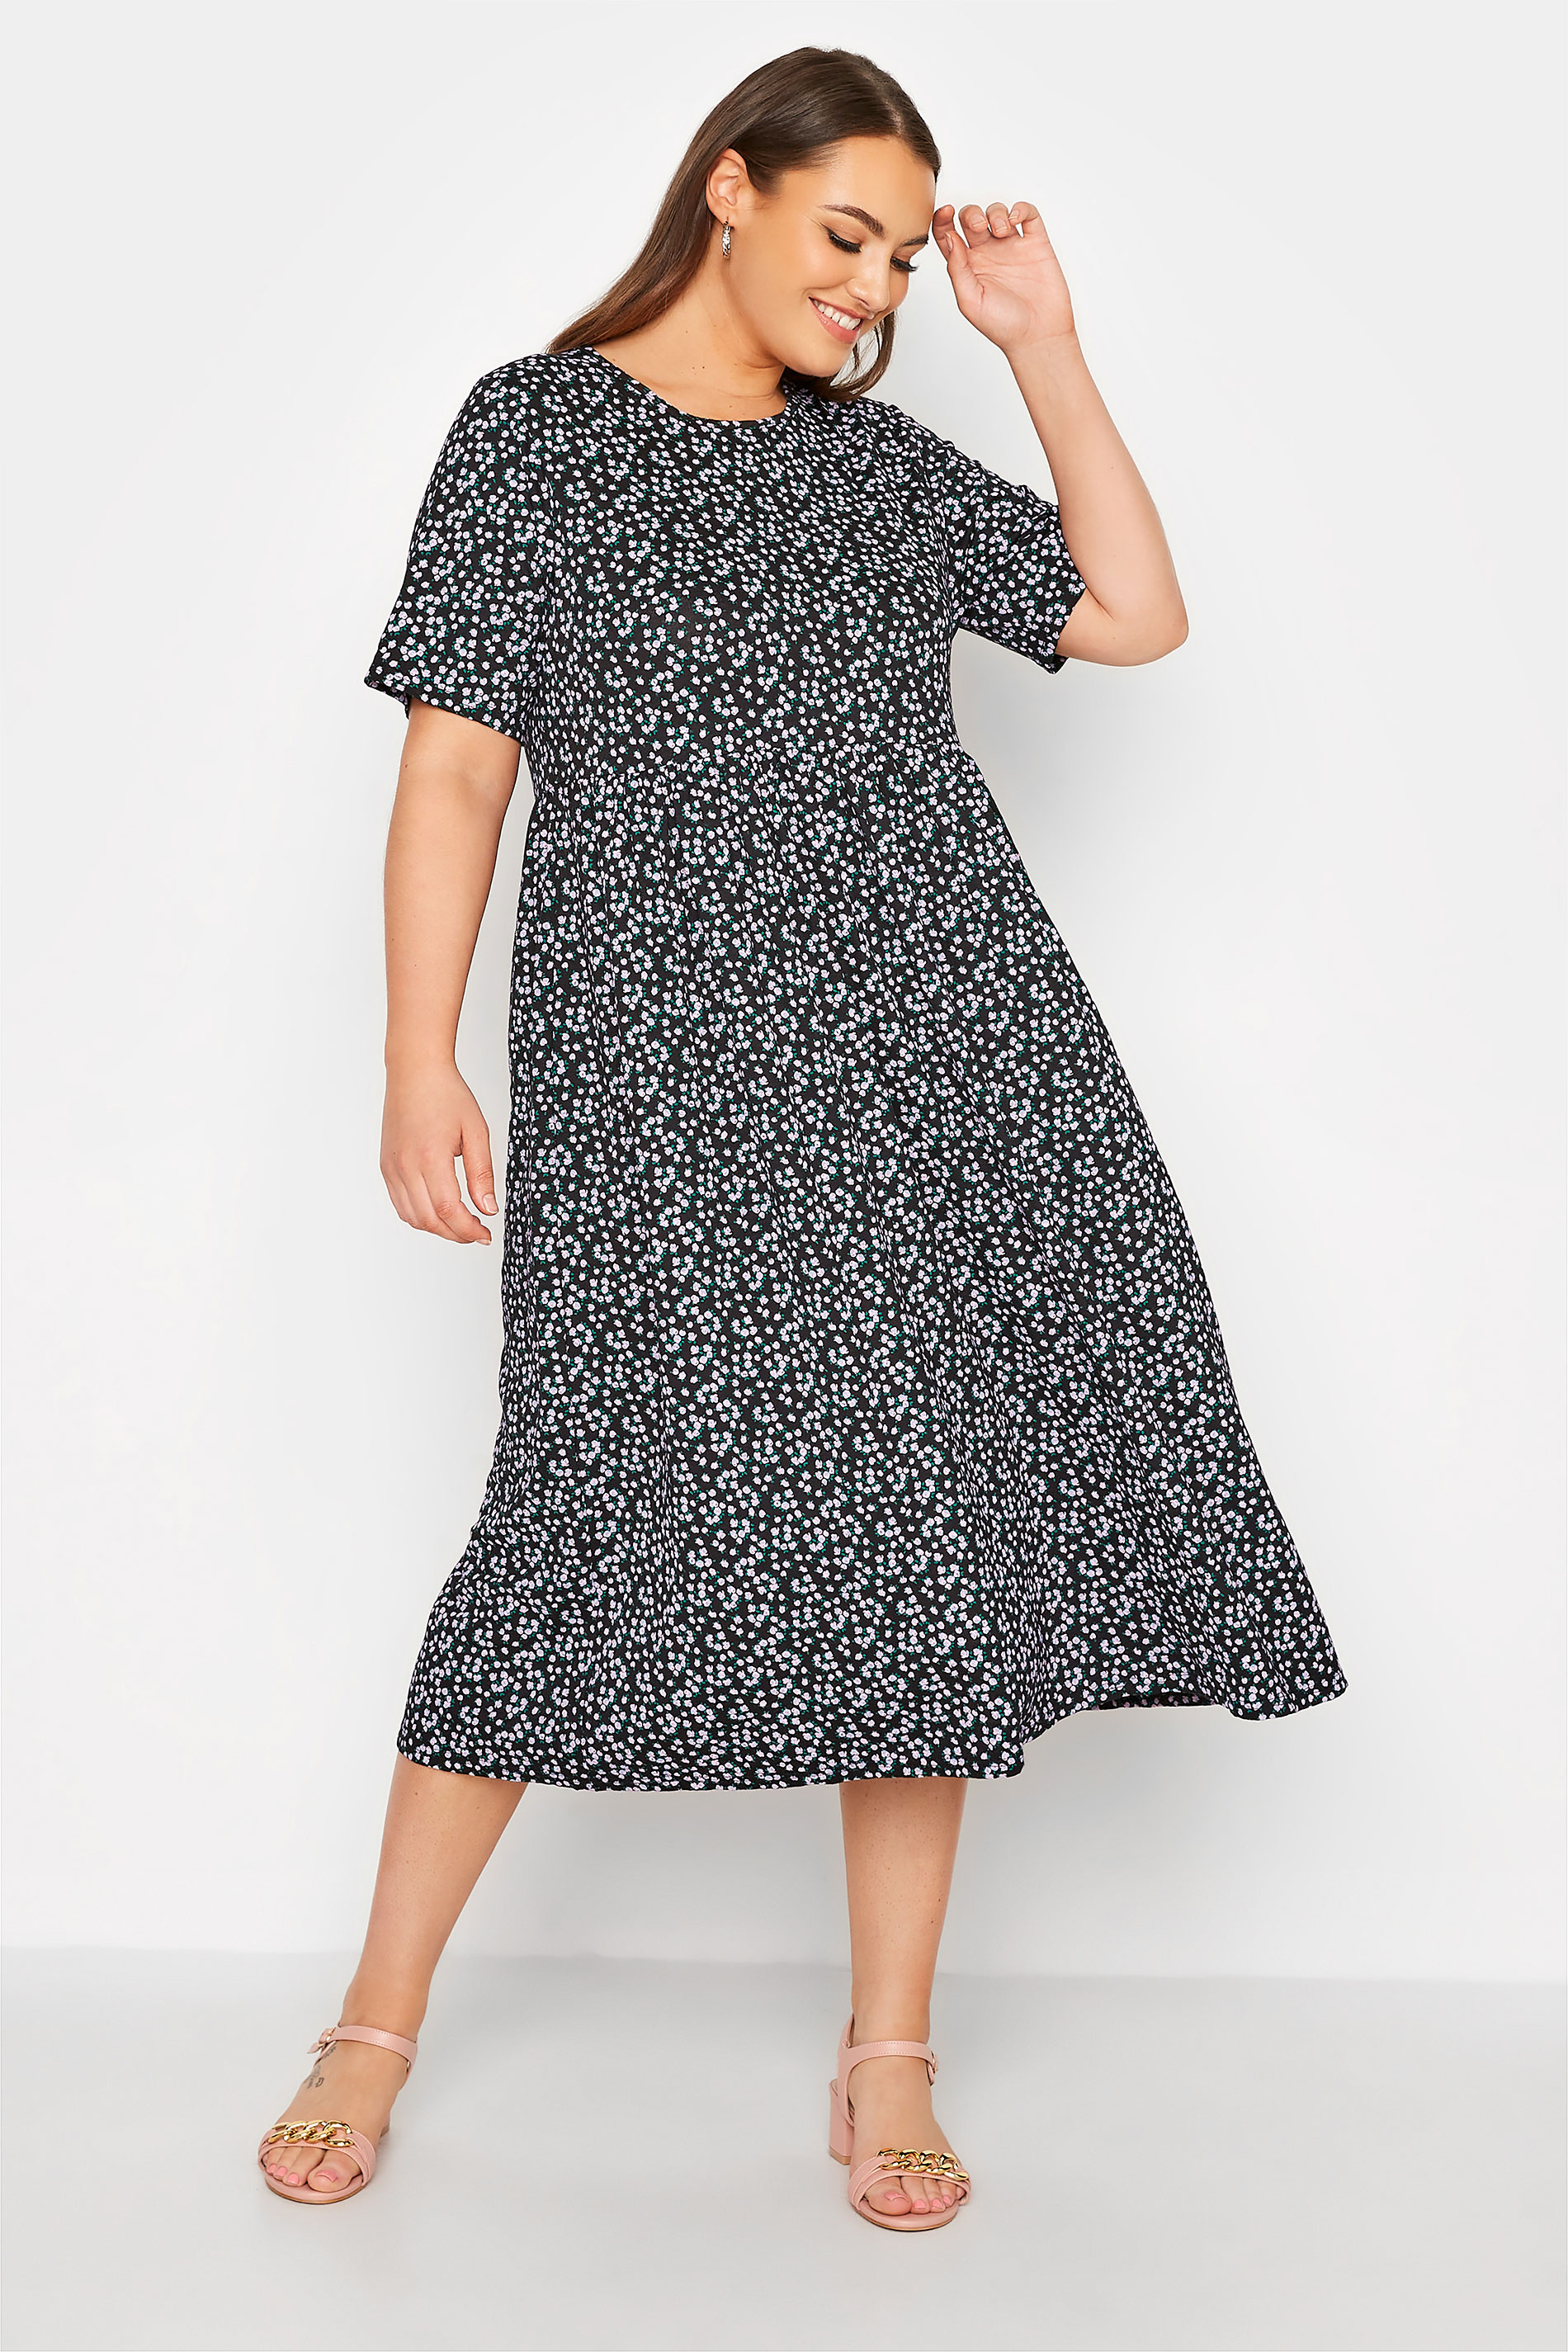 LIMITED COLLECTION Curve Black Ditsy Floral Midaxi Dress_A.jpg